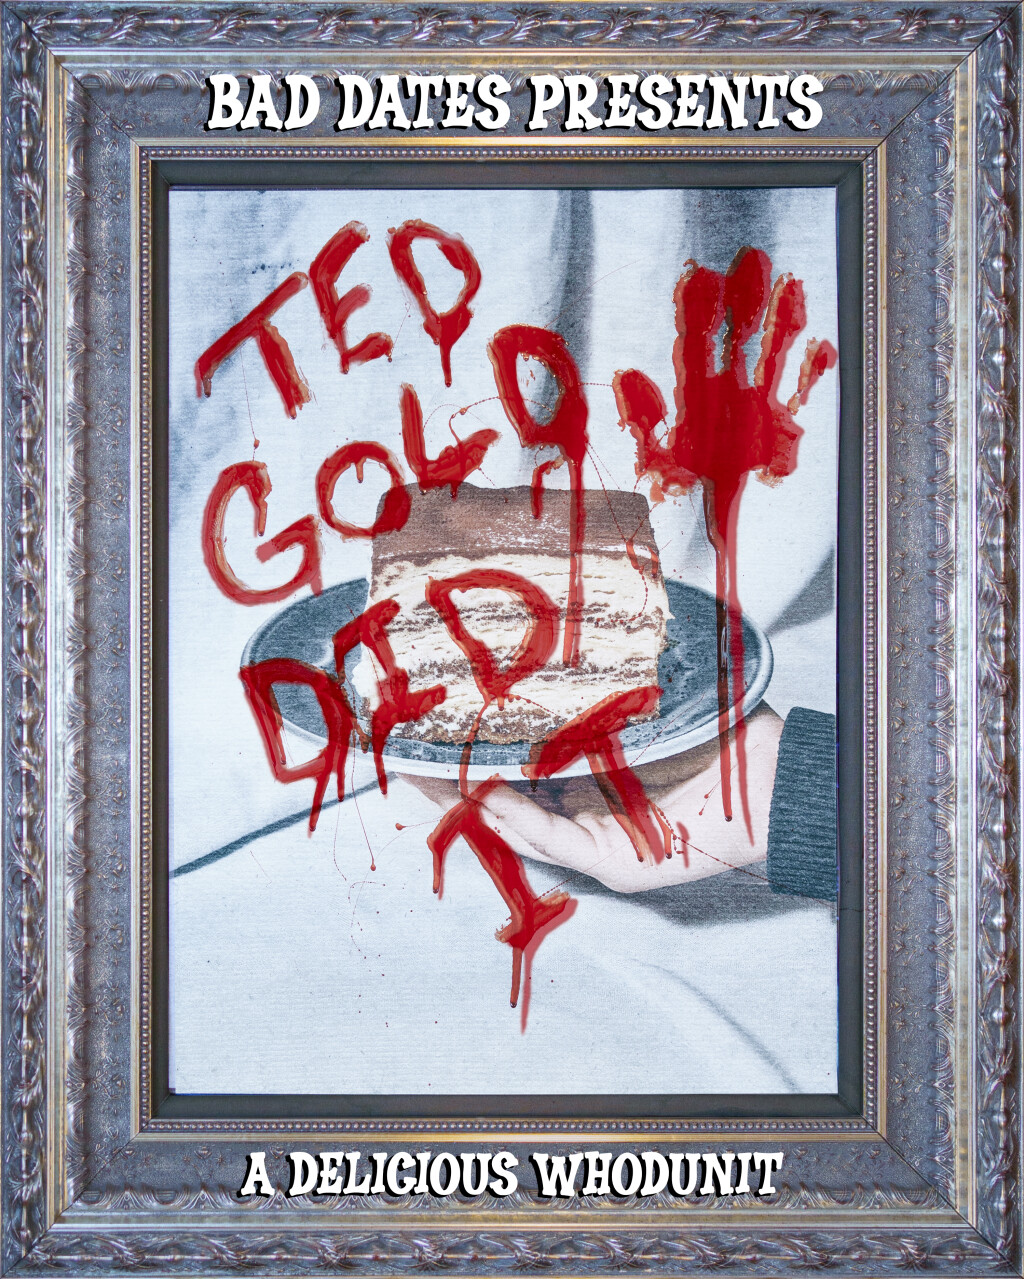 Filmposter for Ted Gold Did It